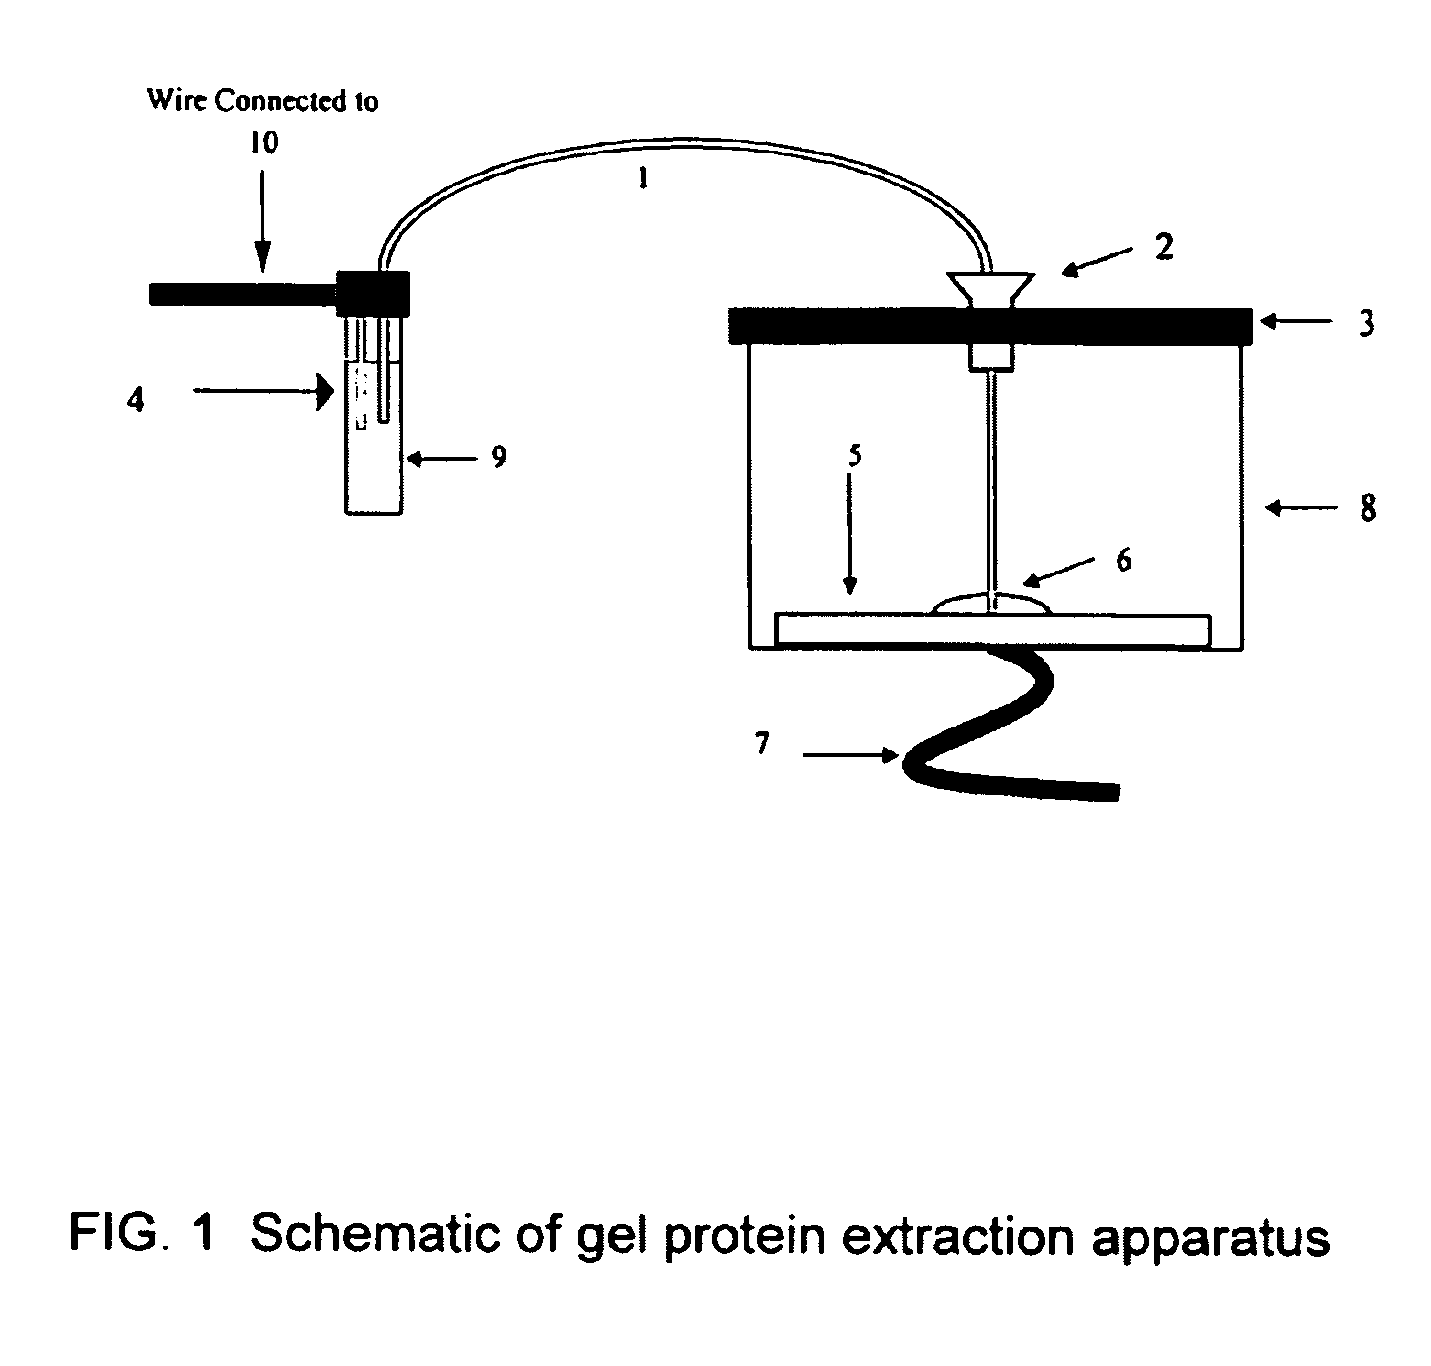 Microfluidic apparatus for performing gel protein extractions and methods for using the apparatus